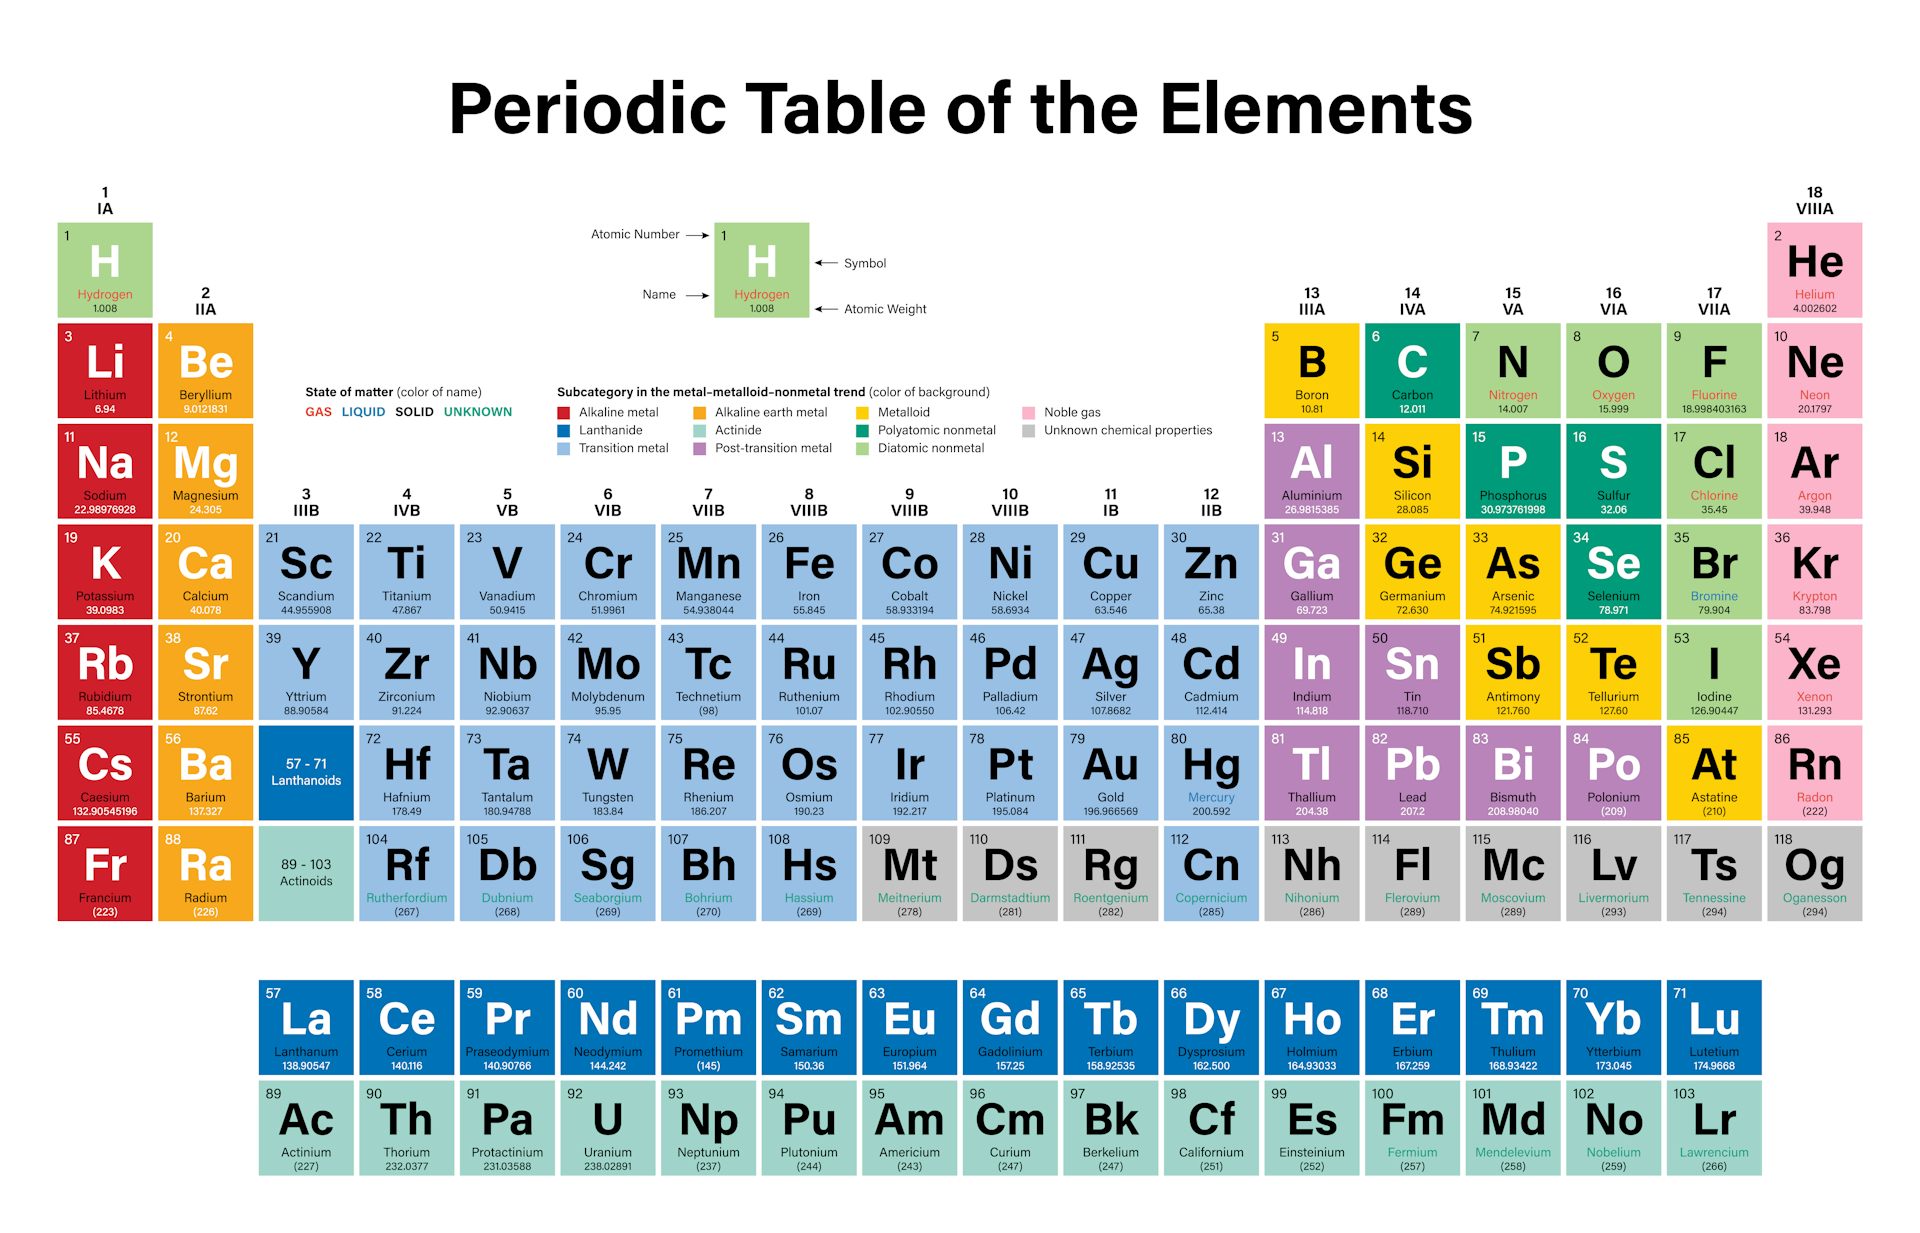 most reactive group on periodic table